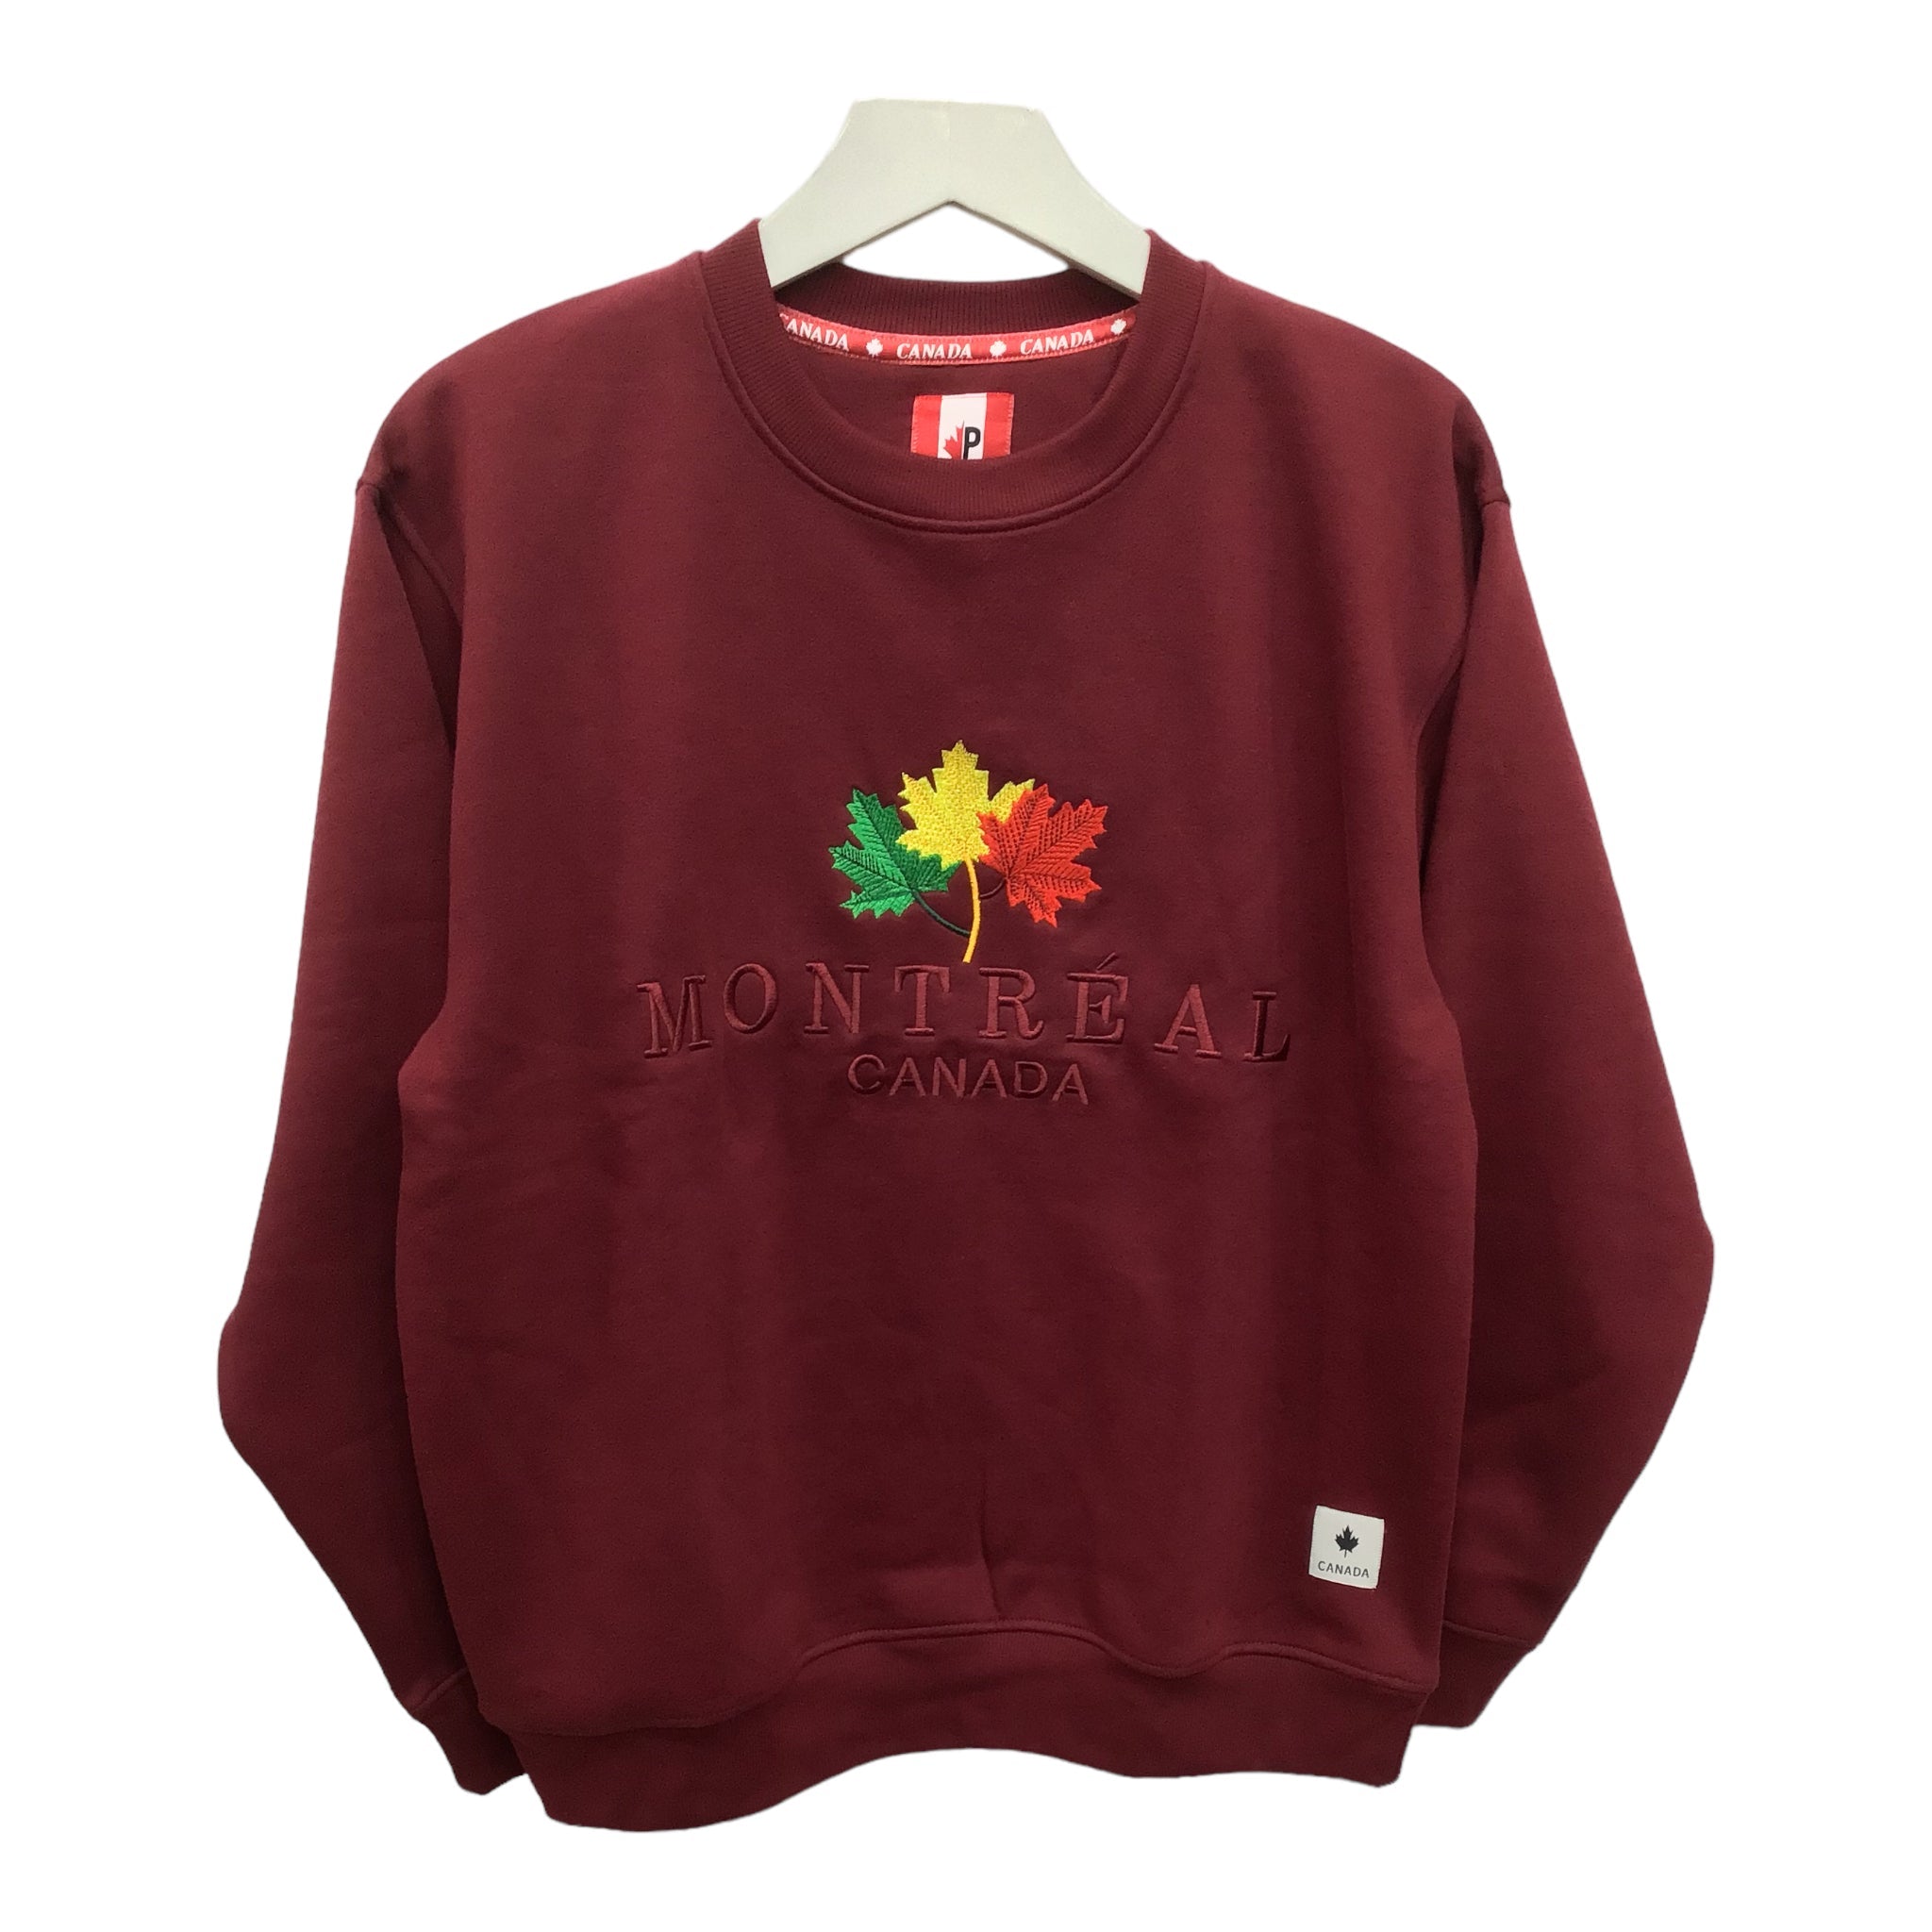 Montreal Crew Neck Sweatshirt Burgundy W/ Red Green & Yellow Maple Leaf Embroidery for Men and Women